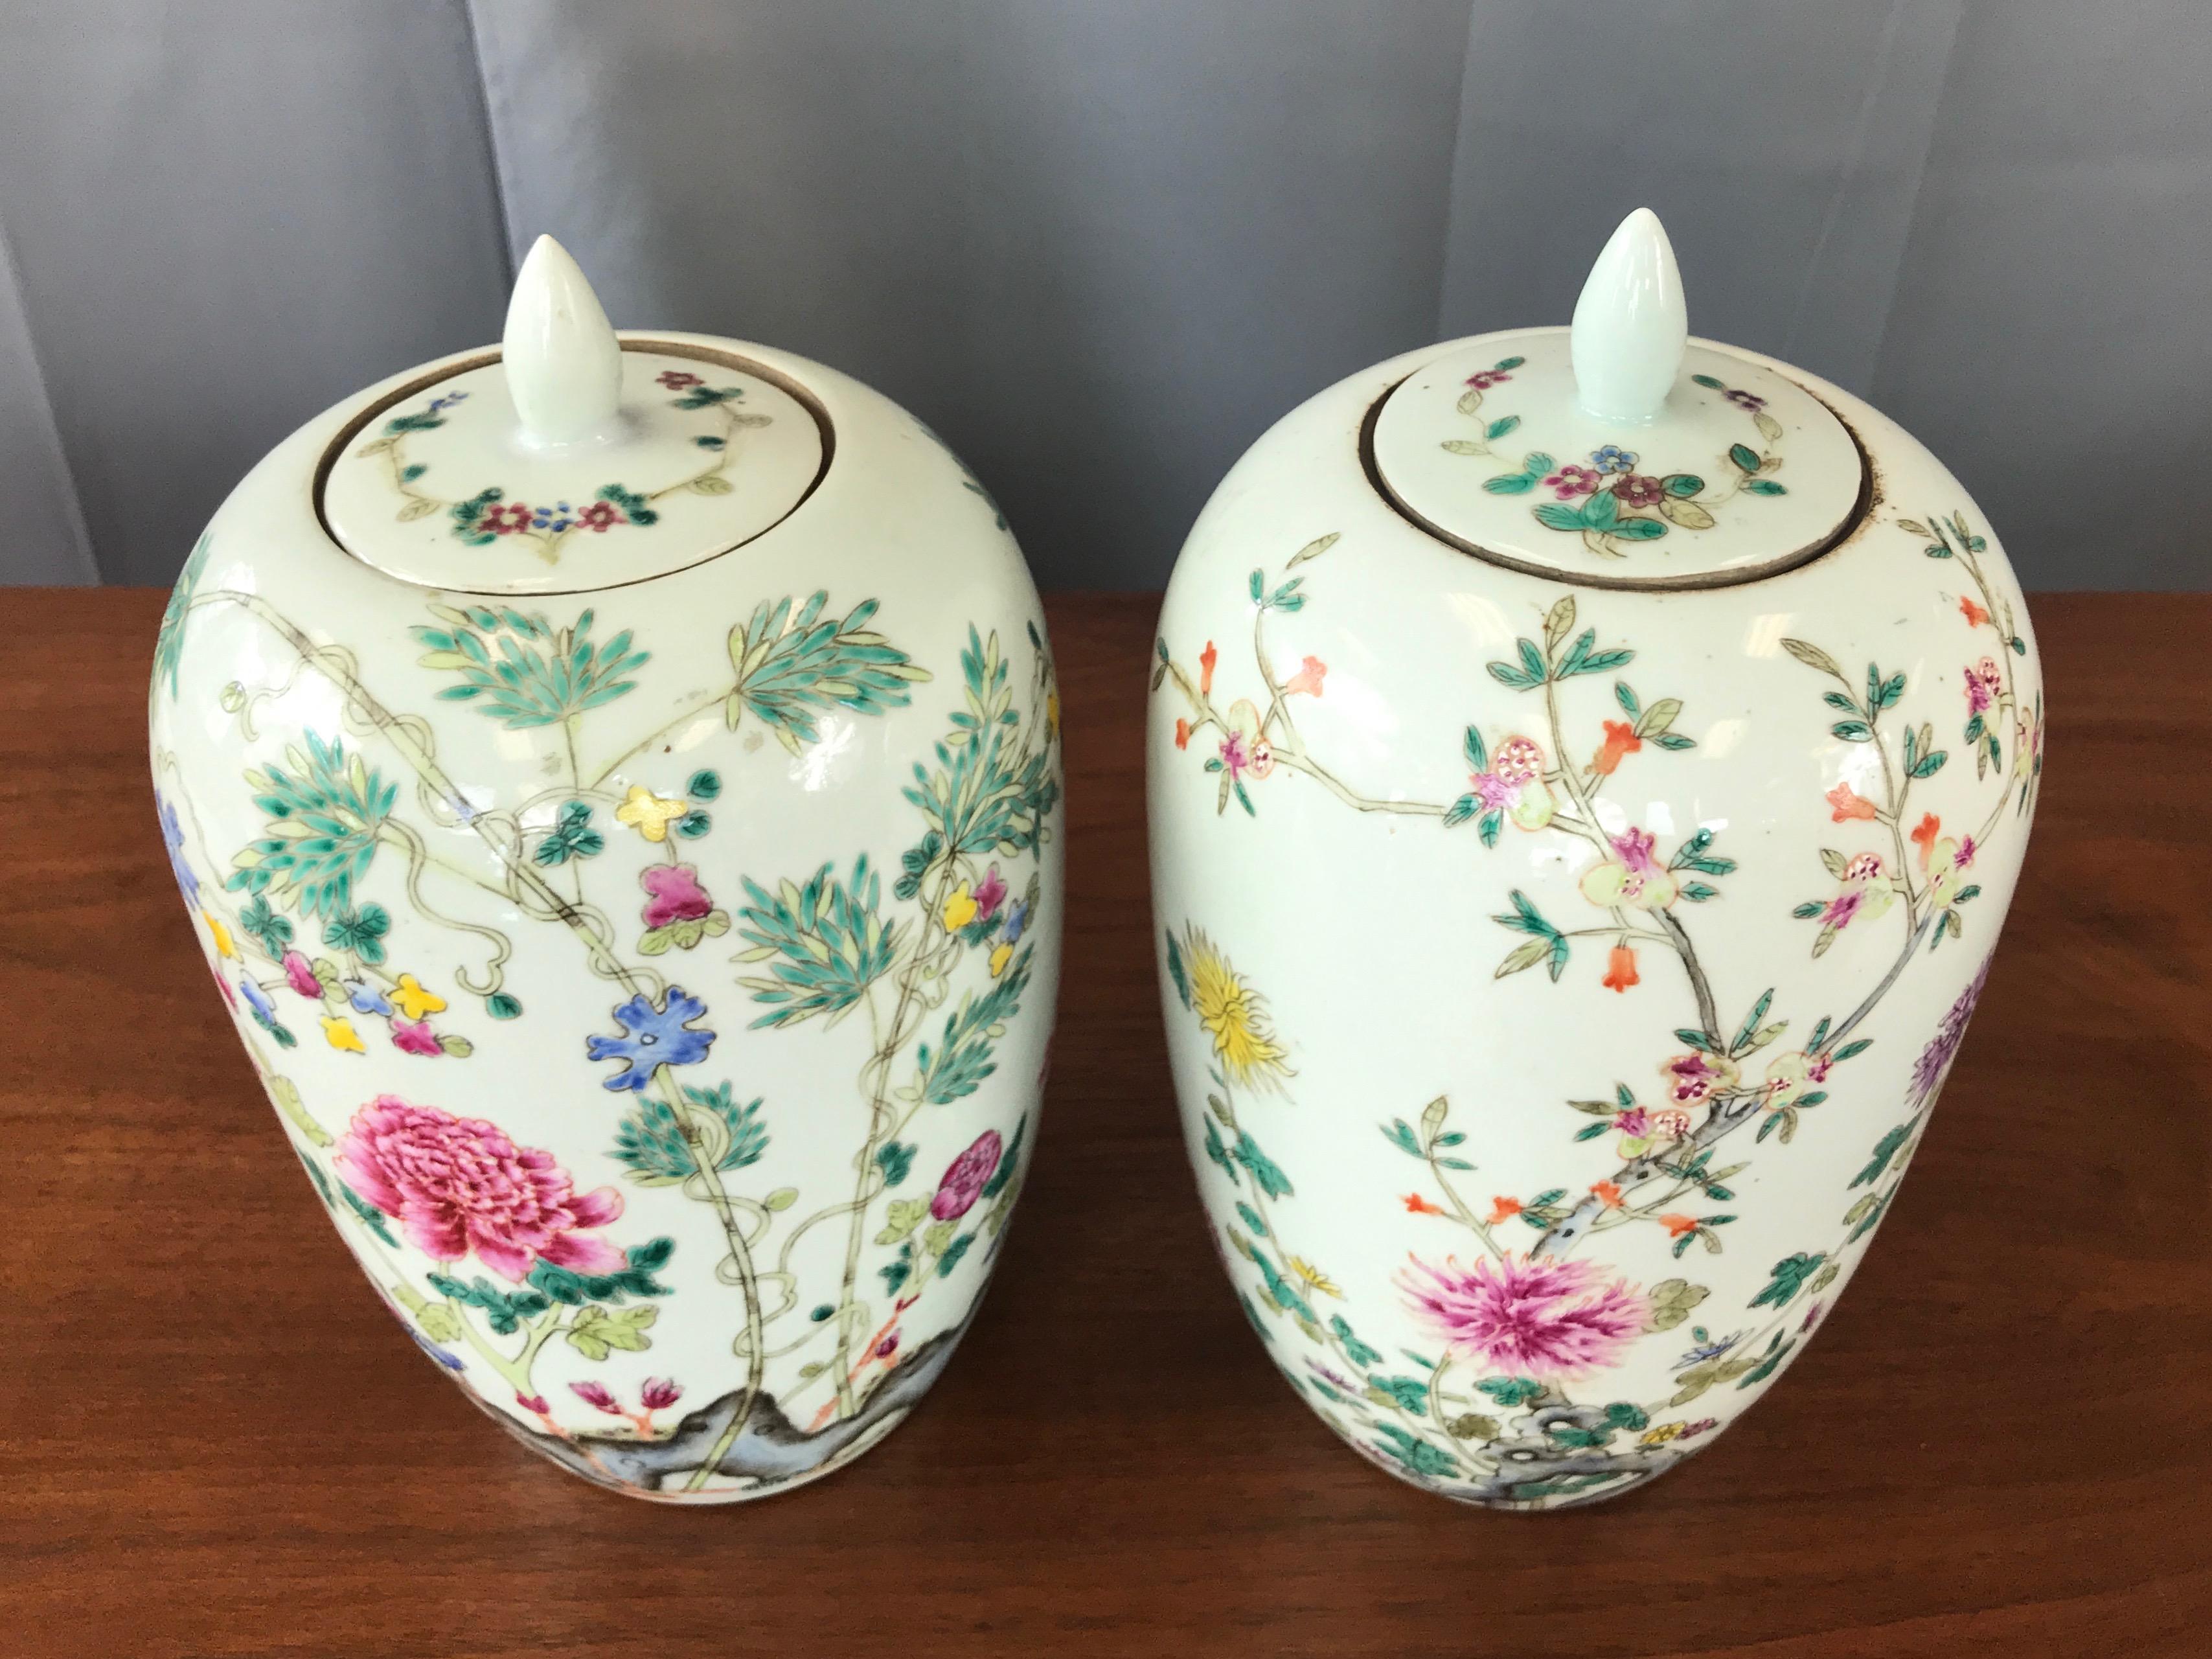 Pair of Fine Chinese Famille Rose Porcelain Covered Vases, Guangxu Period  2